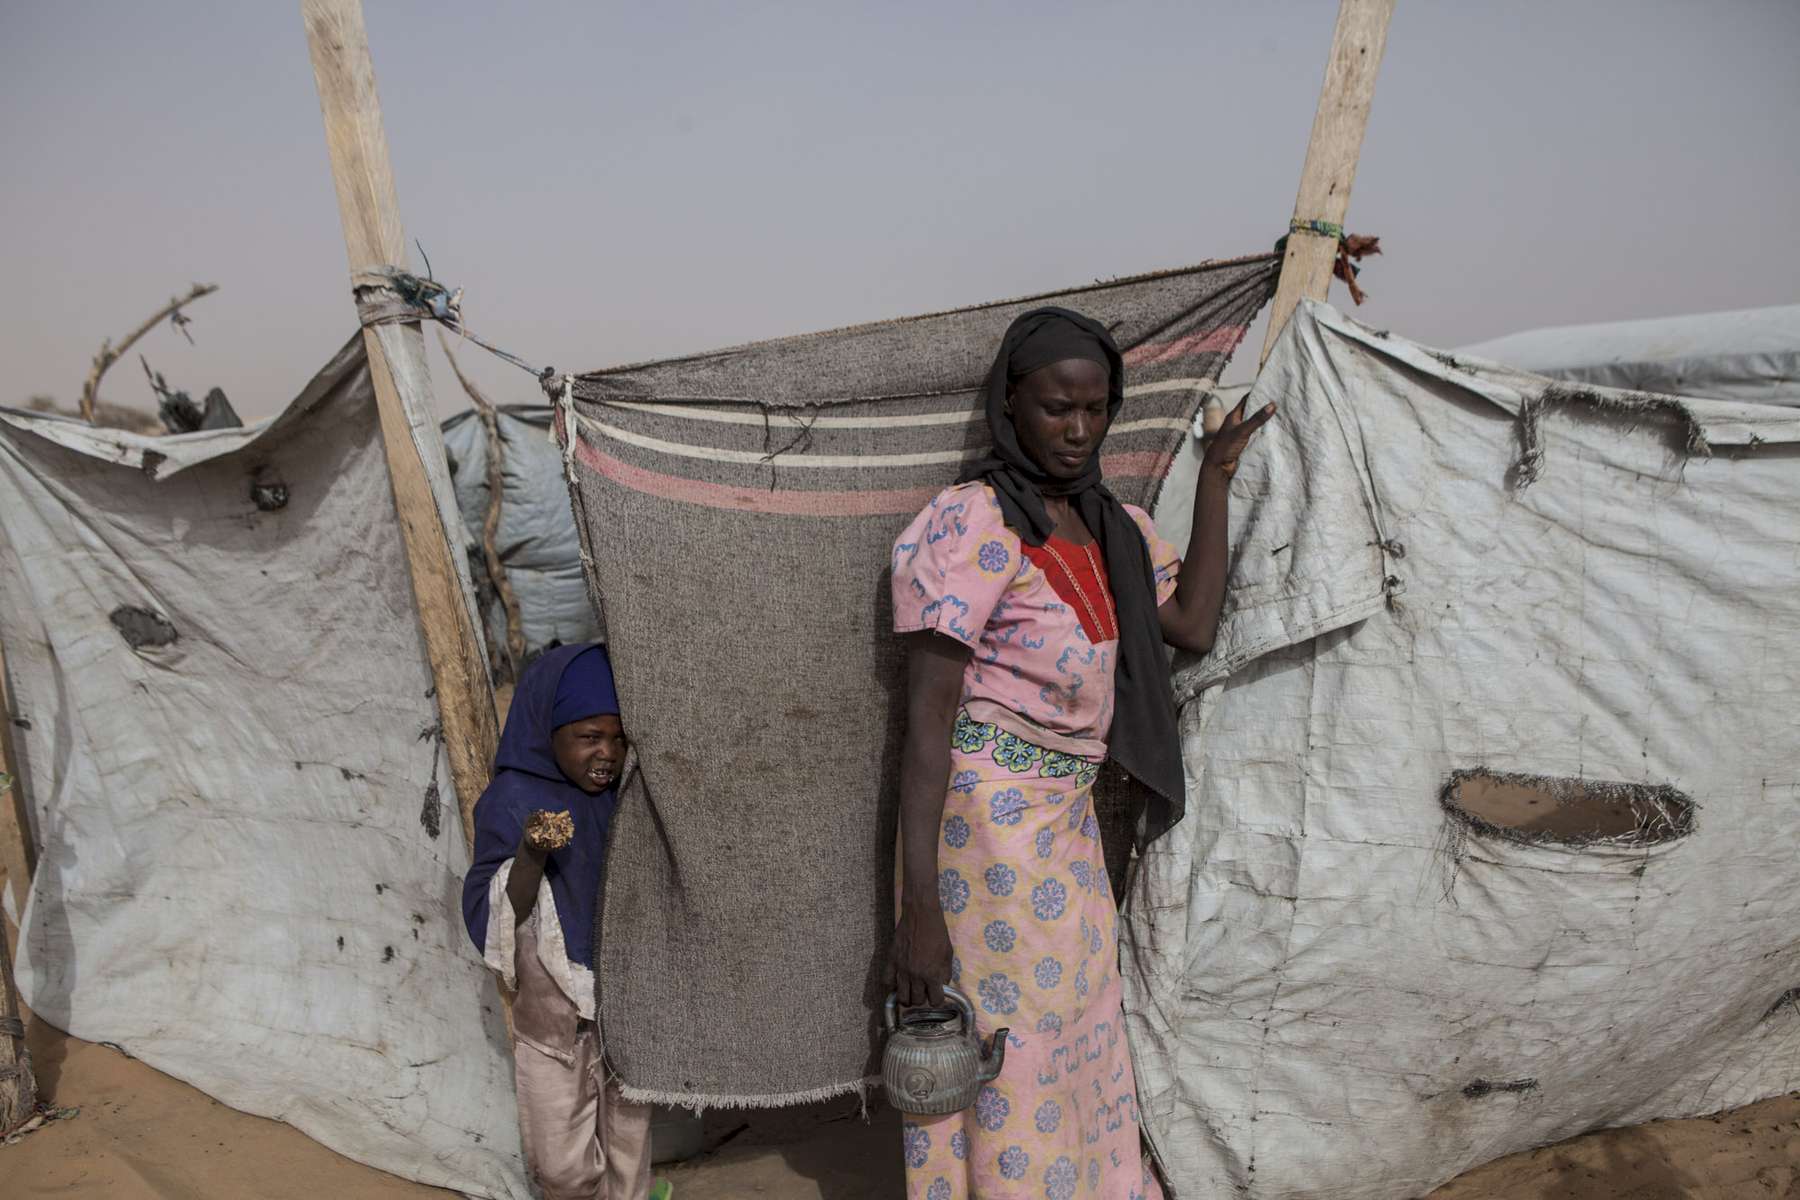 Fati Moussa, 27, stands outside her shelter at the Dar es Salaam refugee camp in Baga Sola, Chad February 2017. Moussa originally from Baga, Nigeria, fled across the lake to Baga Sola after surviving one of Boko Haram's worst massacres in January 2015. Unable to farm she  and her family survives on the charity of other refugees and the limited aid provided by under-funded aid agencies. The Boko Haram crisis was originally contained within northeastern Nigeria, where the extremist group focused their terror, but in 2015, as the regions multinational force began to close in on its areas of control, Boko Haram crossed borders and started to target neighboring countries. The spread of the crisis from NE Nigeria to its neighboring countries surrounding the Lake is resulting in one of the largest humanitarian crisis in the world. 